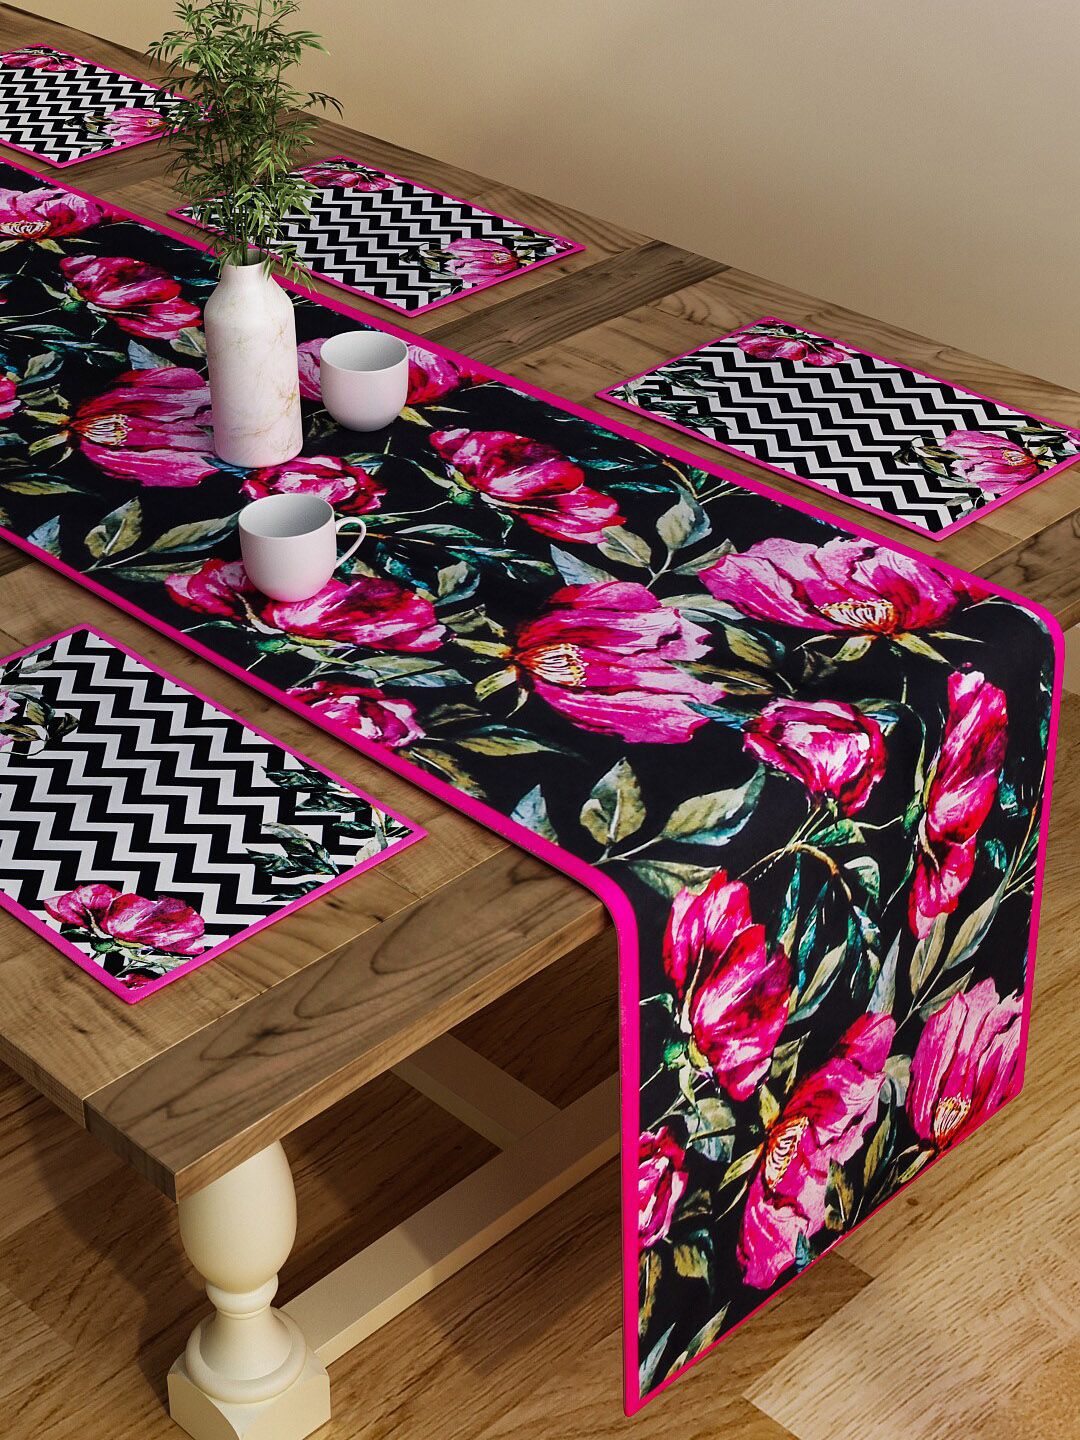 SEJ by Nisha Gupta Set of 6 Black Printed Cotton Table Placemats and Runner Price in India